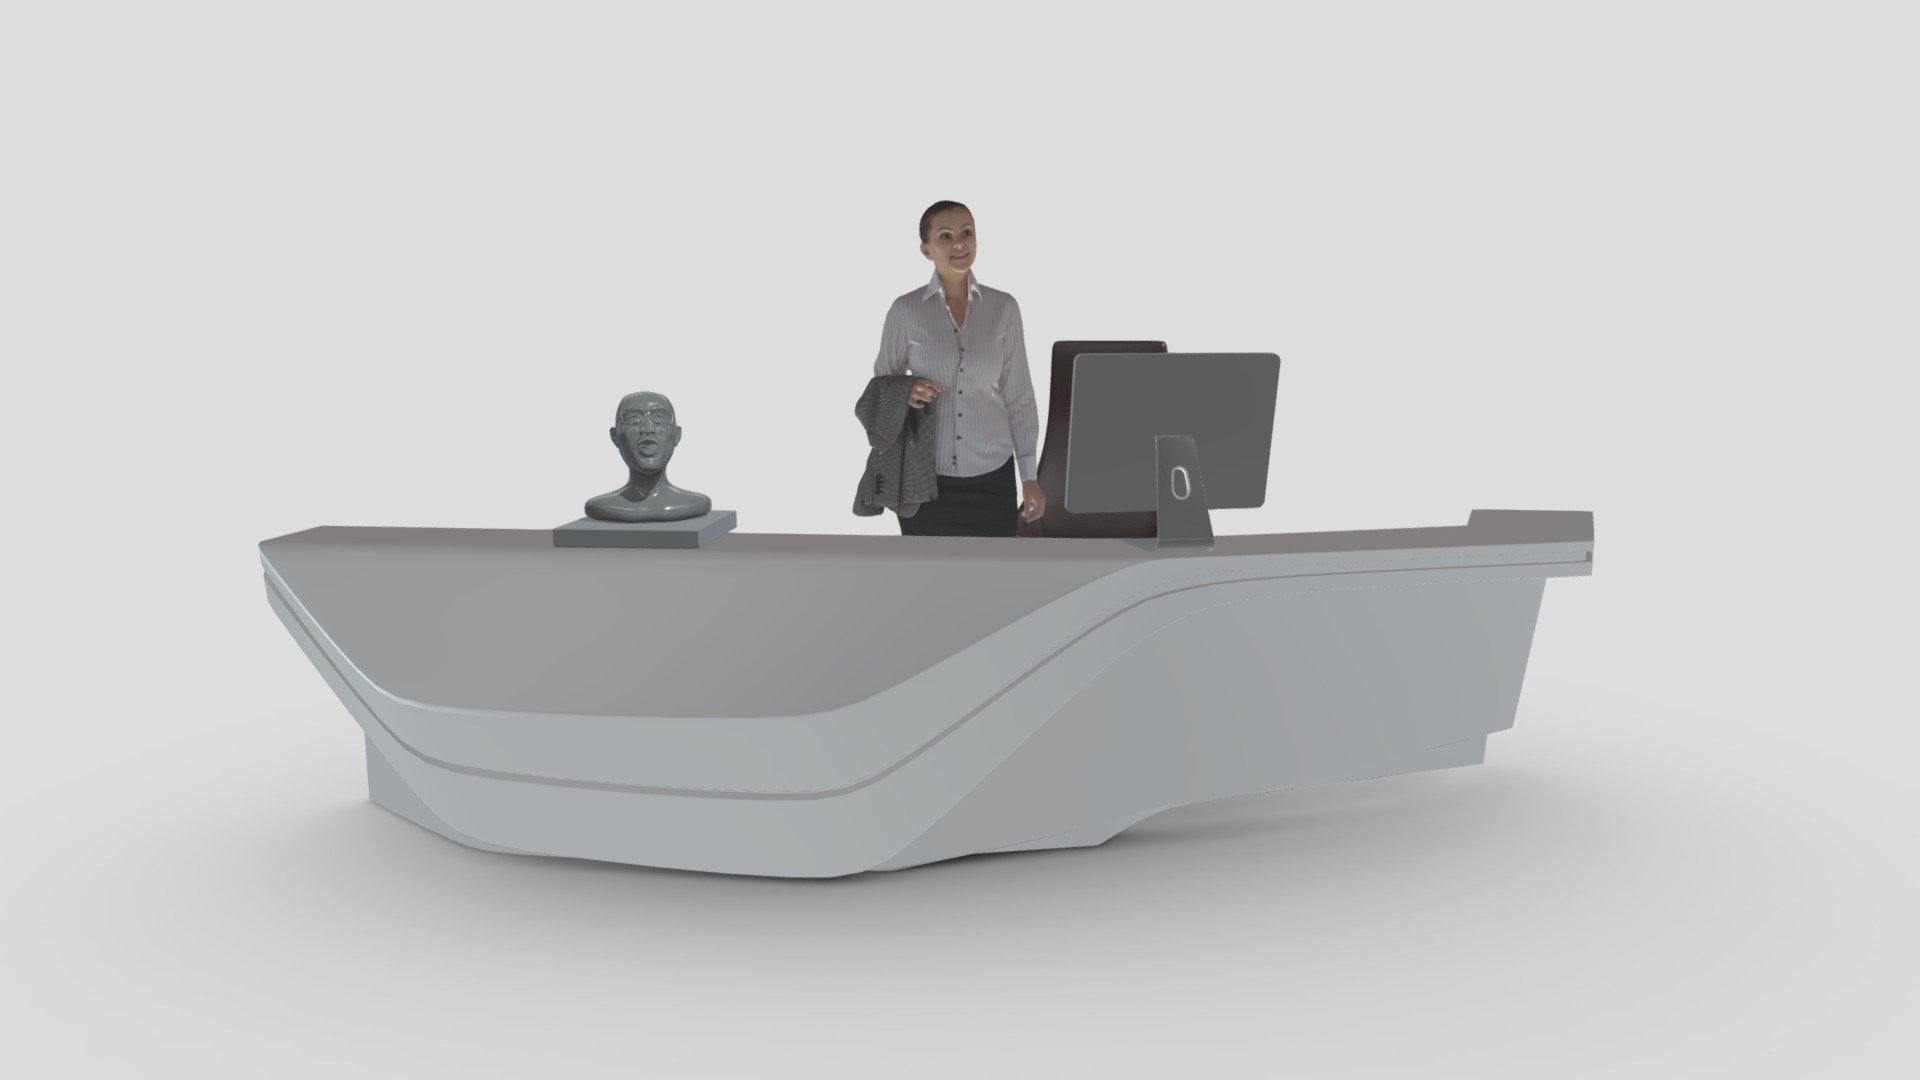 Reception Desk - 061

Native Format File : 3Ds Max 2020 &ndash; Rendering by Vray Next

File save as : 3Ds Max 2017 with converted all object to Editable Poly.

Exporting Formats :
Autodesk FBX ( .fbx ) and OBJ ( .obj &amp; .mtl ).

All 4 Texture maps are include as JPG.

Support 24/7 3d model